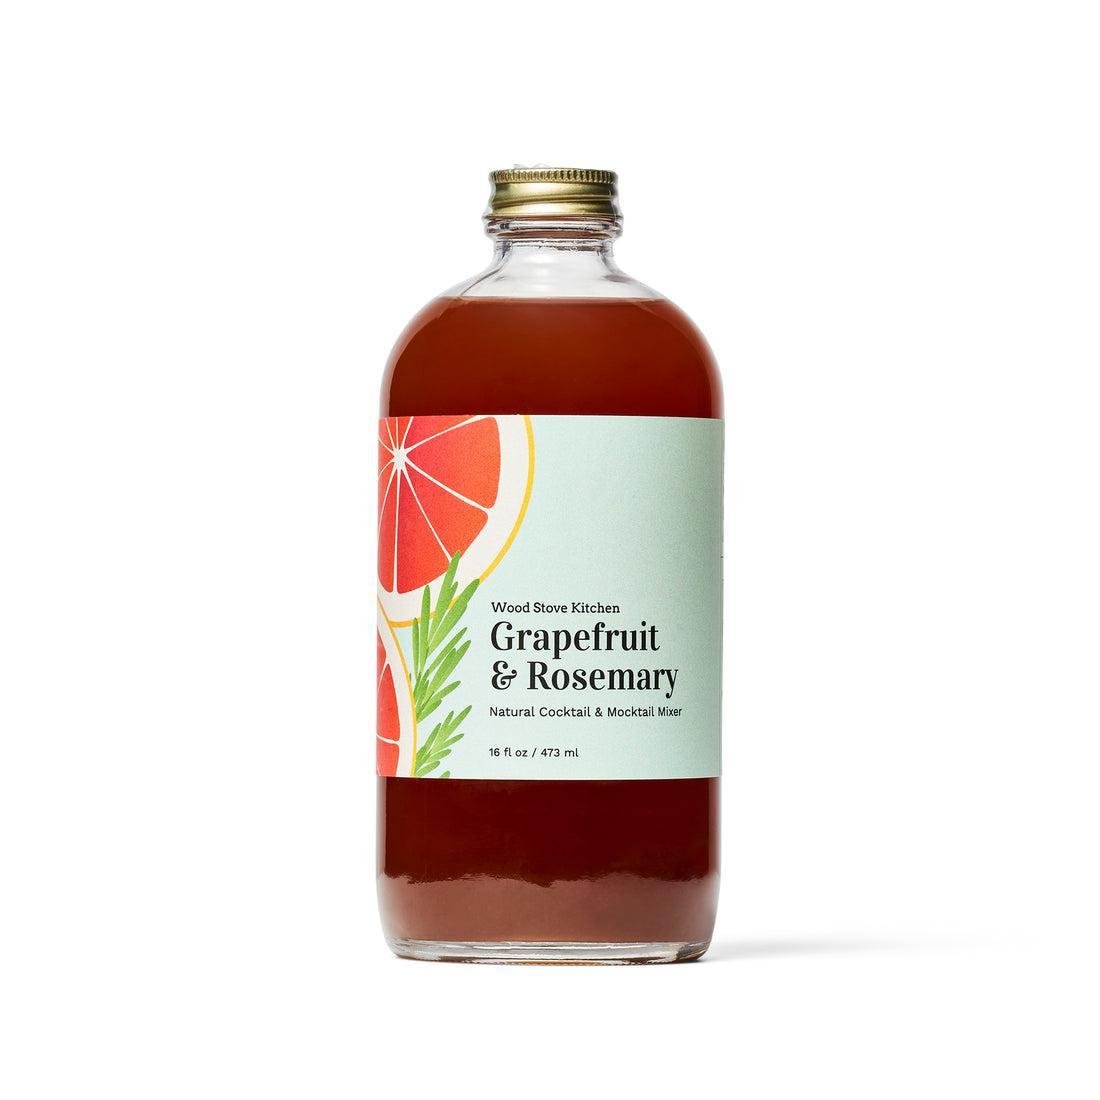 Wood Stove Kitchen - 'Grapefruit & Rosemary' Cocktail Mixer (16OZ) - The Epicurean Trader